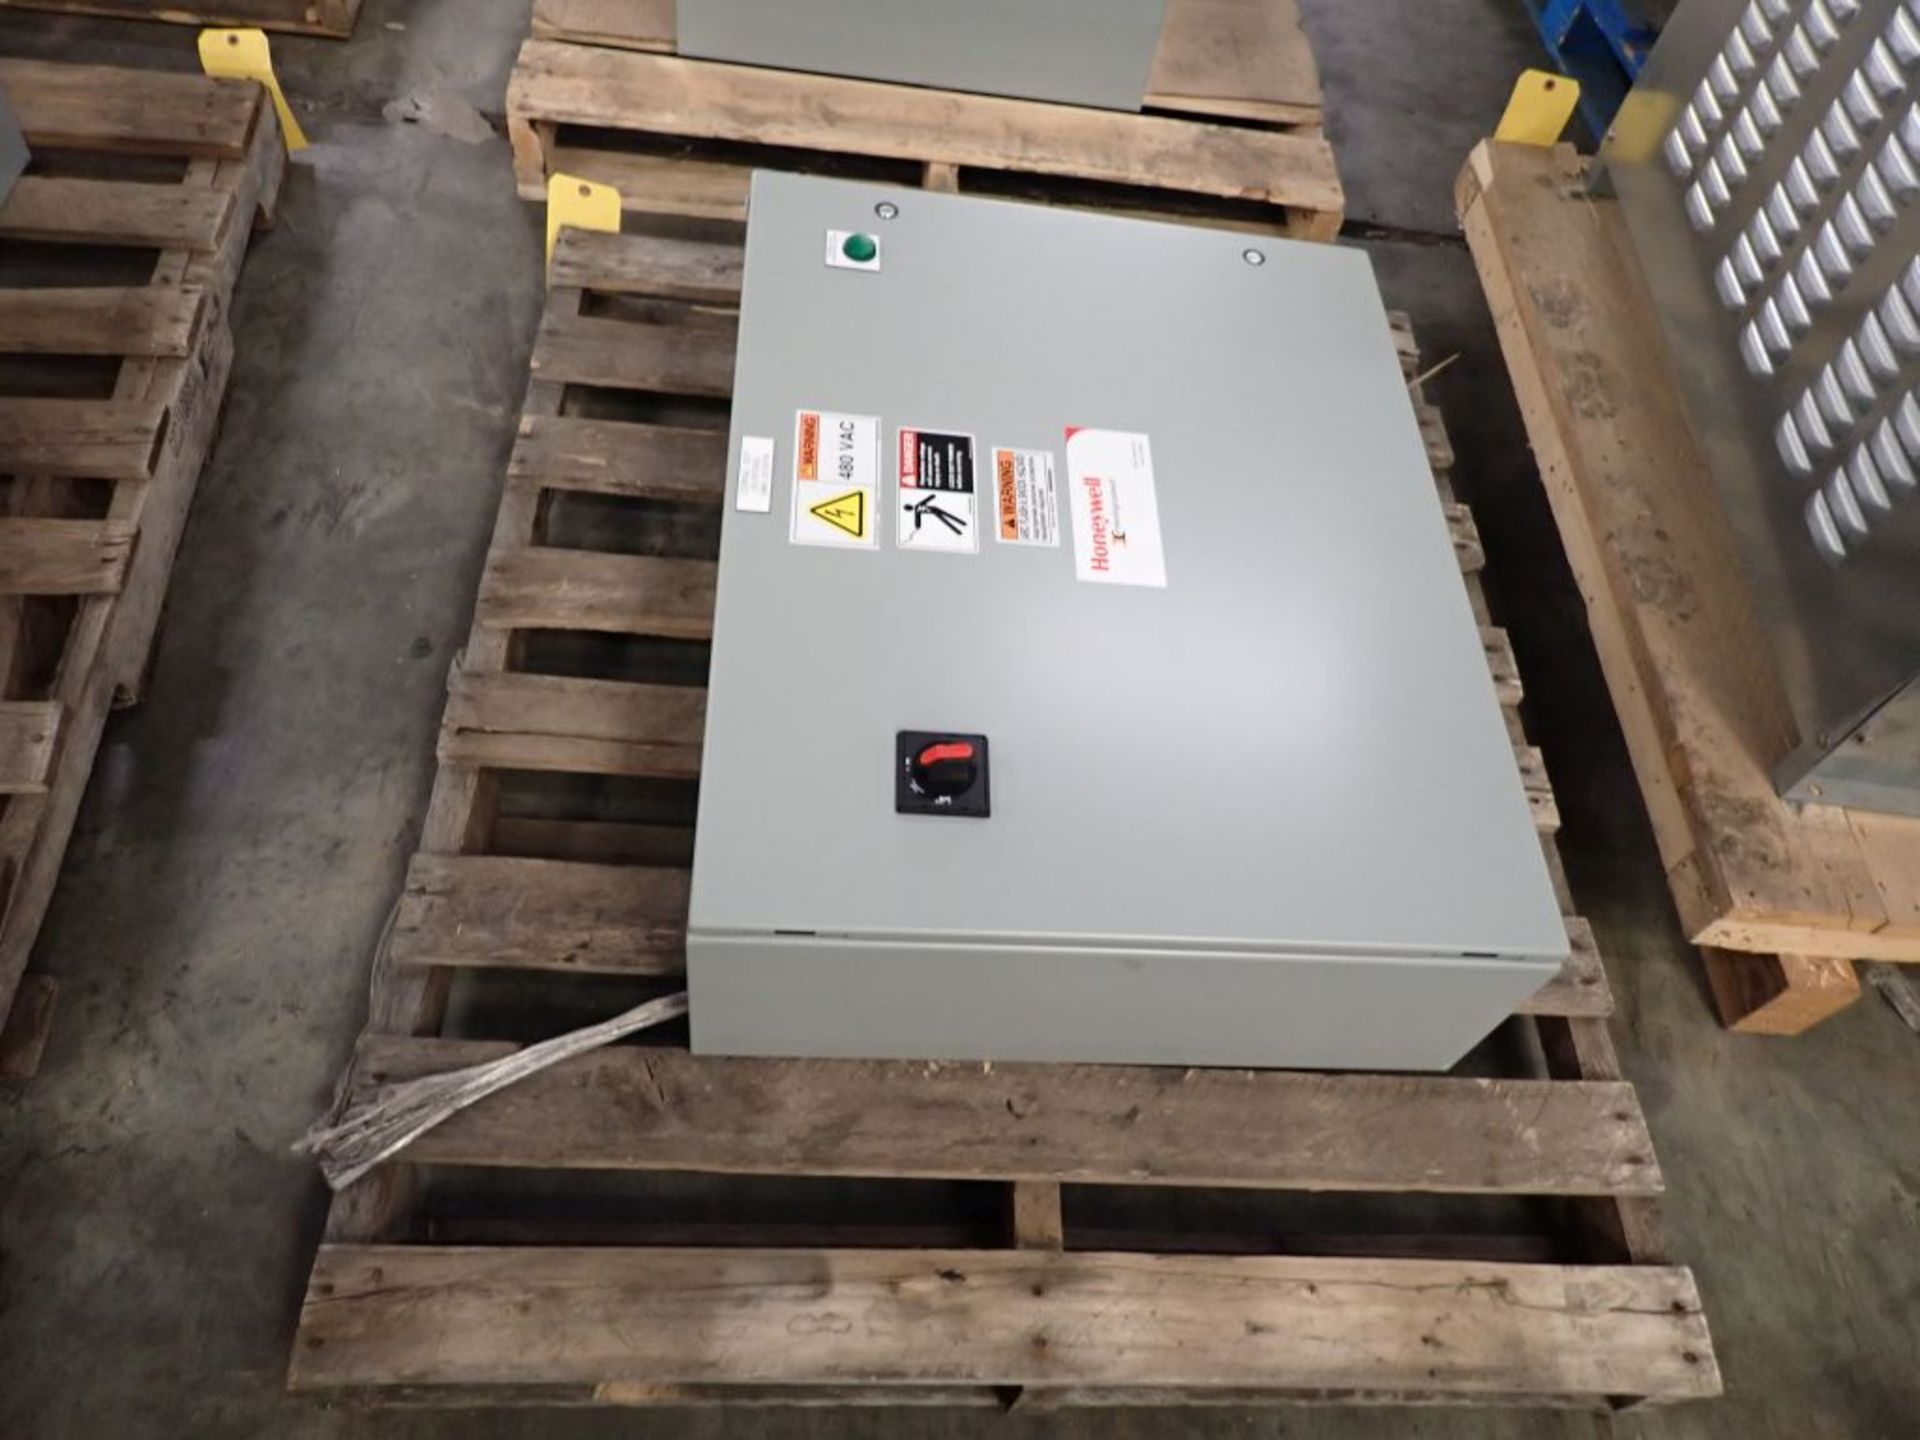 Hoffman Nvent Industrial Control Panel Enclosure with Contents - Image 3 of 9